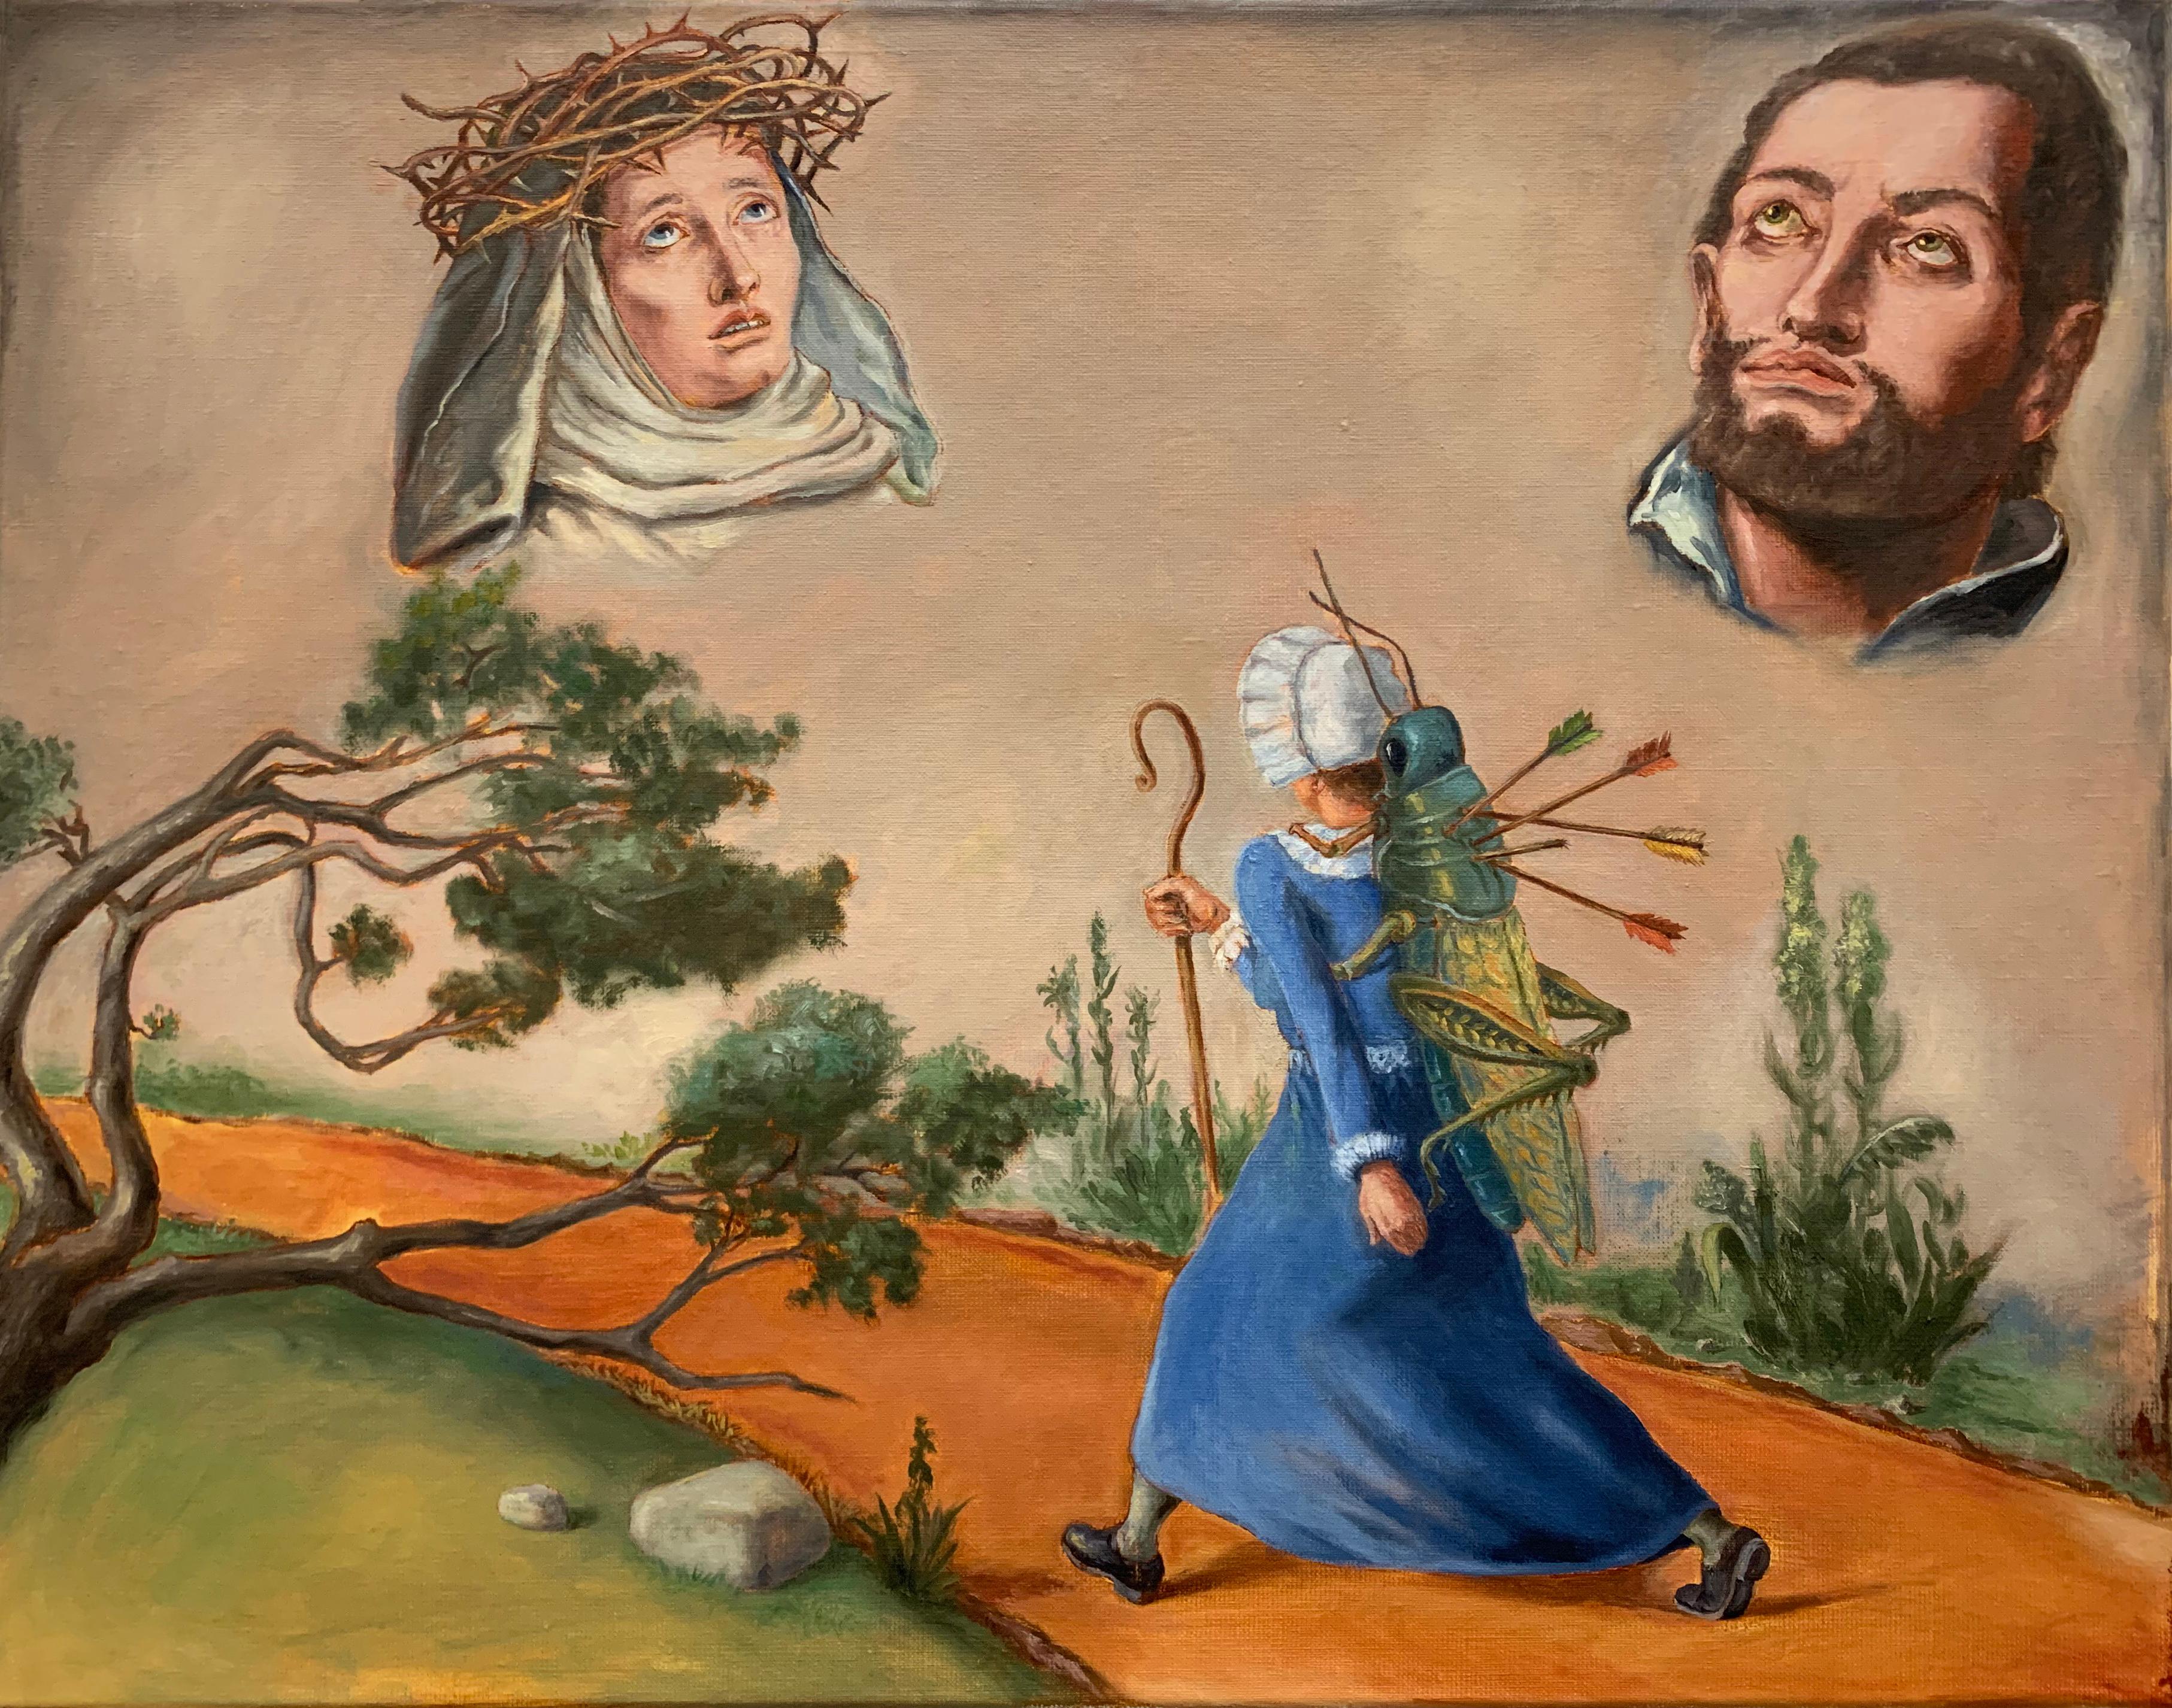 "TO THE INFIRMARY", surrealist painting, saints, insects, path, dream, religious